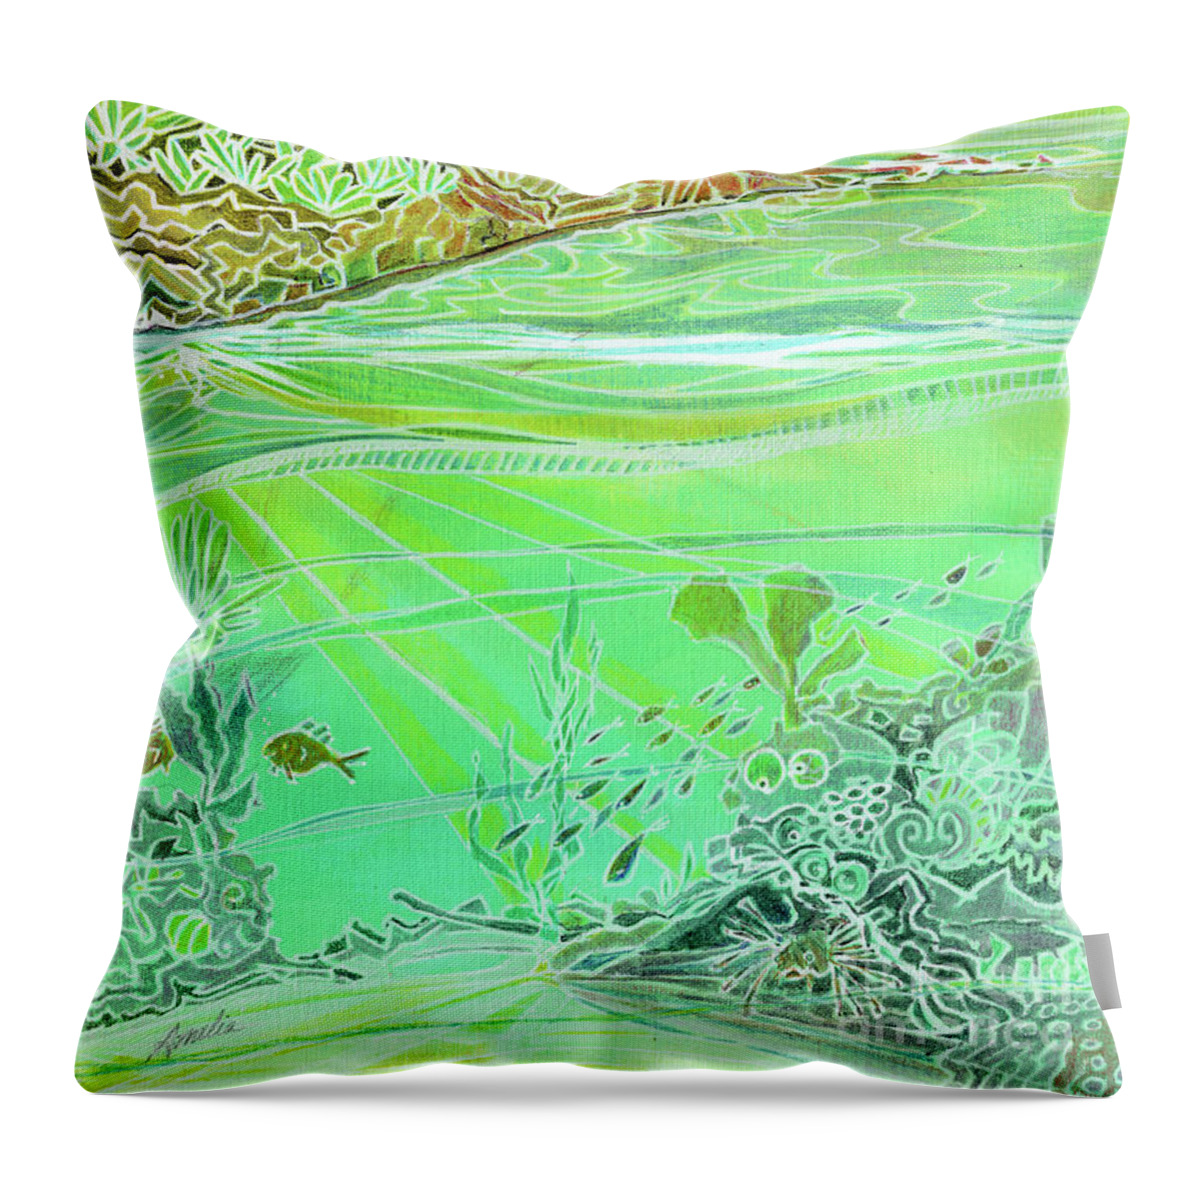 Reef Throw Pillow featuring the painting Yellow Reef by Amelia Stephenson at Ameliaworks